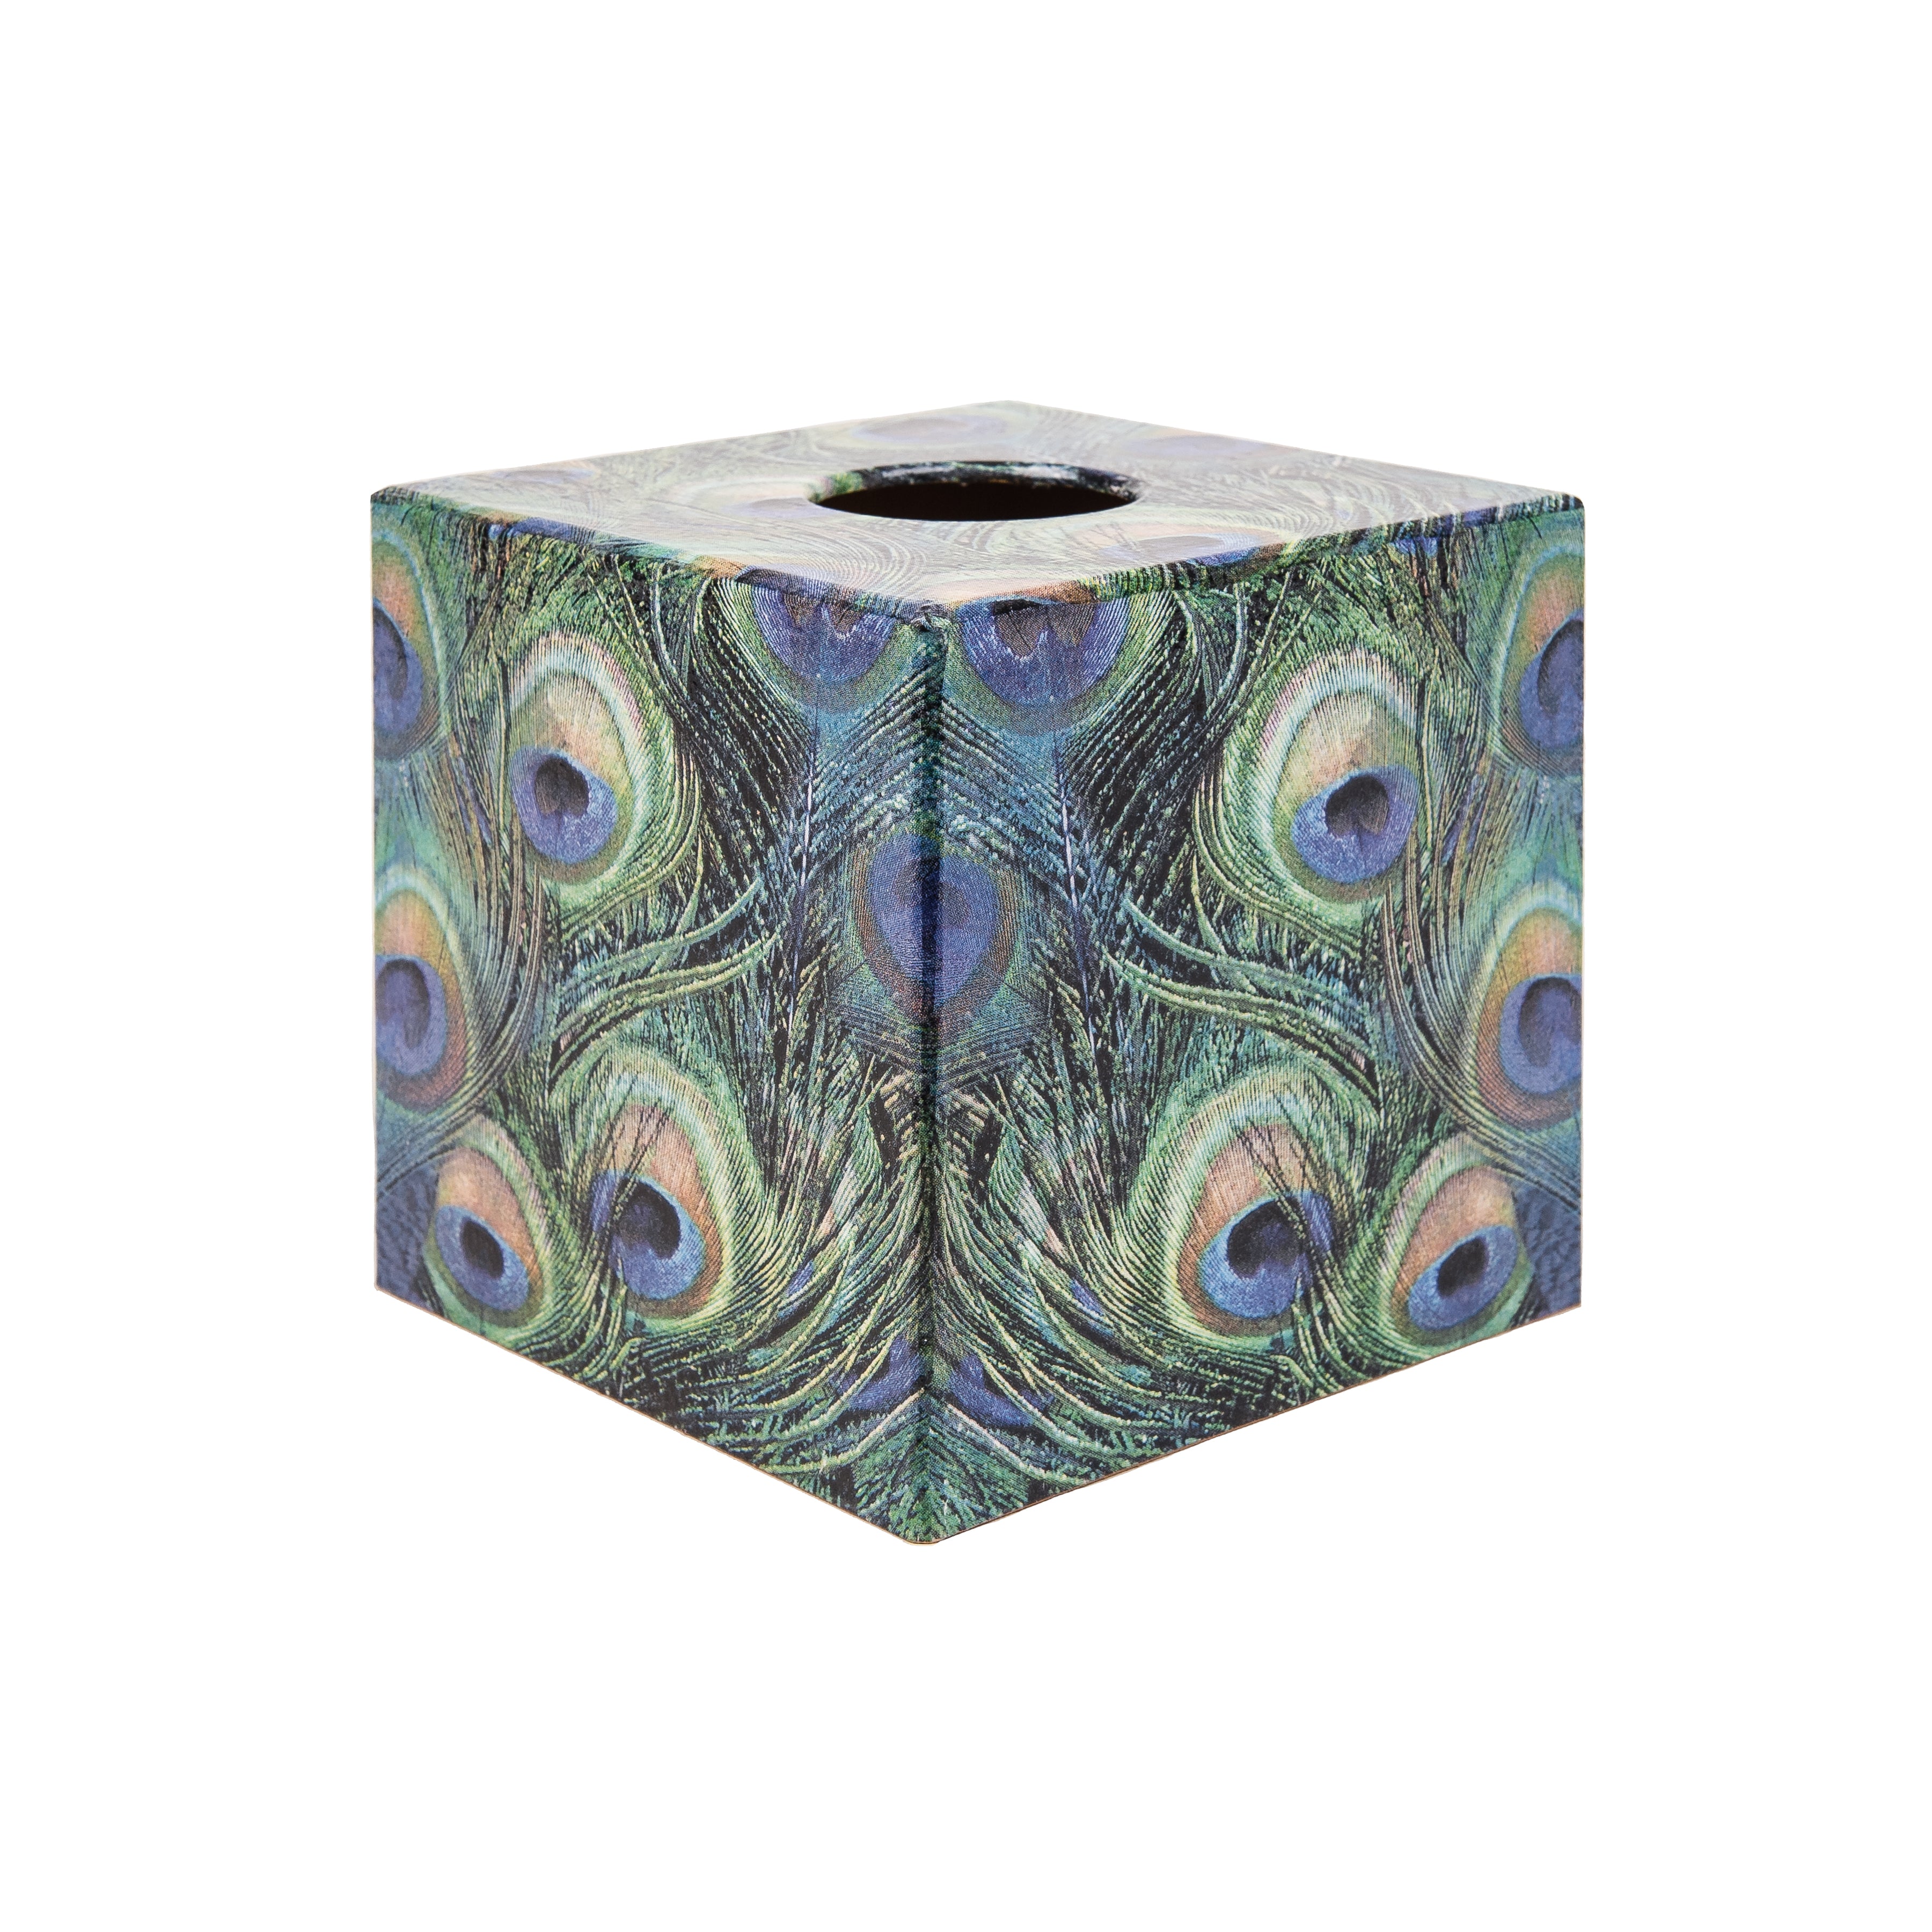 Tissue Box Cover wooden Peacock Plume